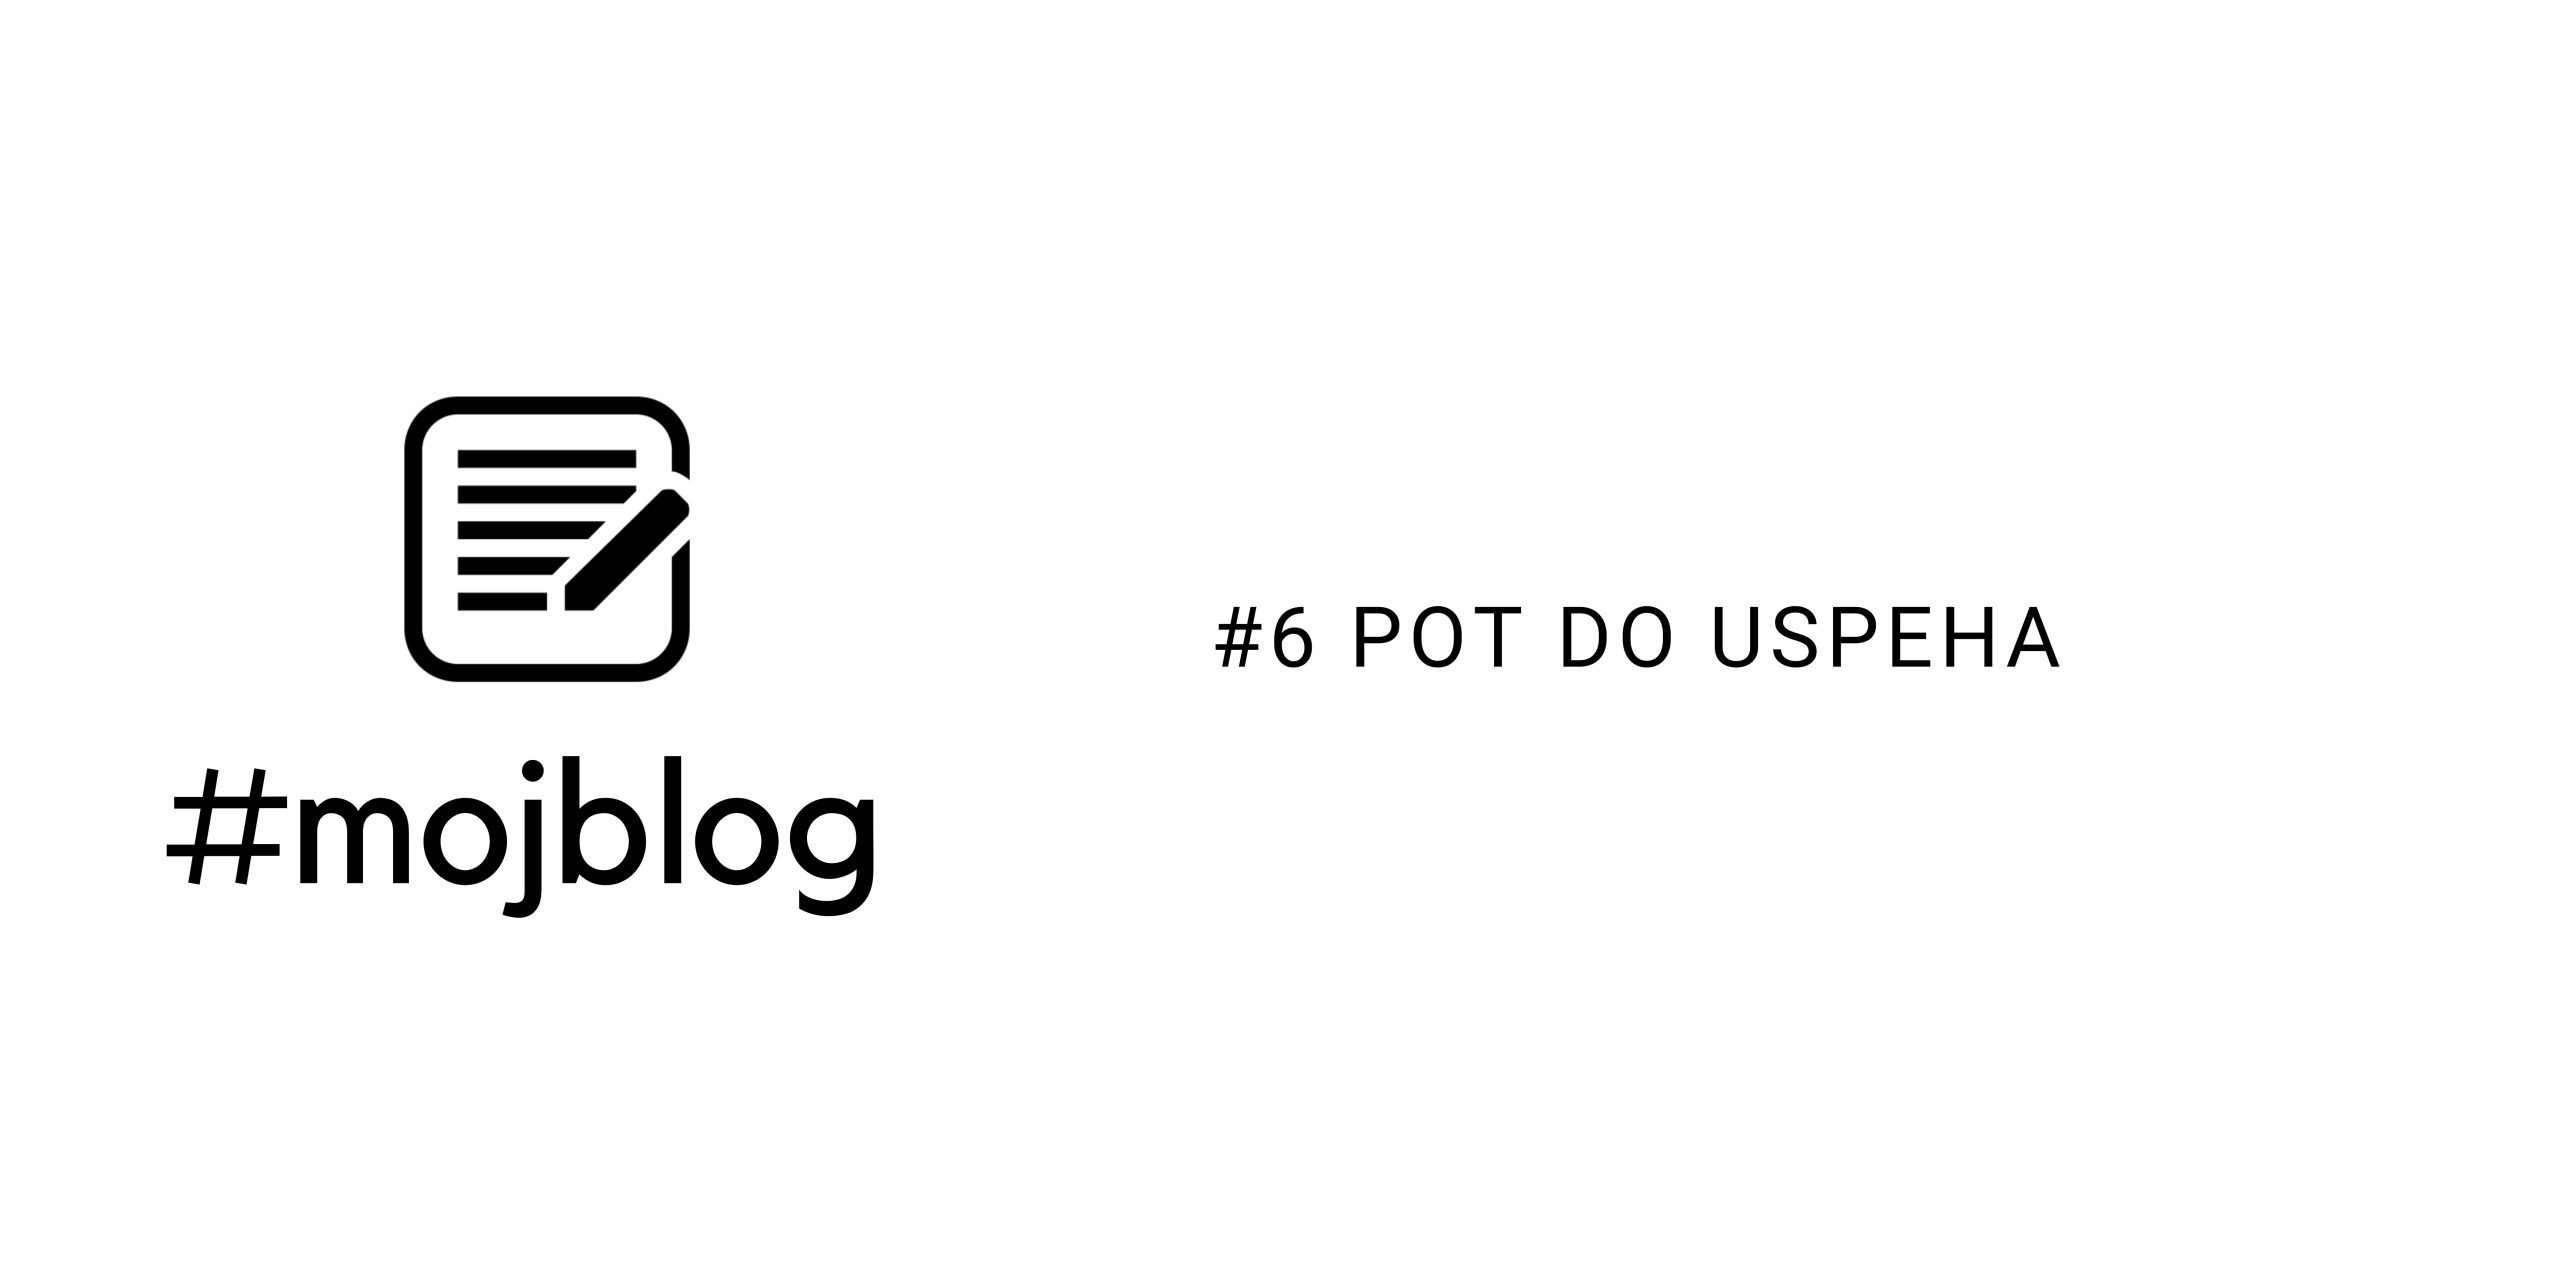 You are currently viewing #6 POT DO USPEHA